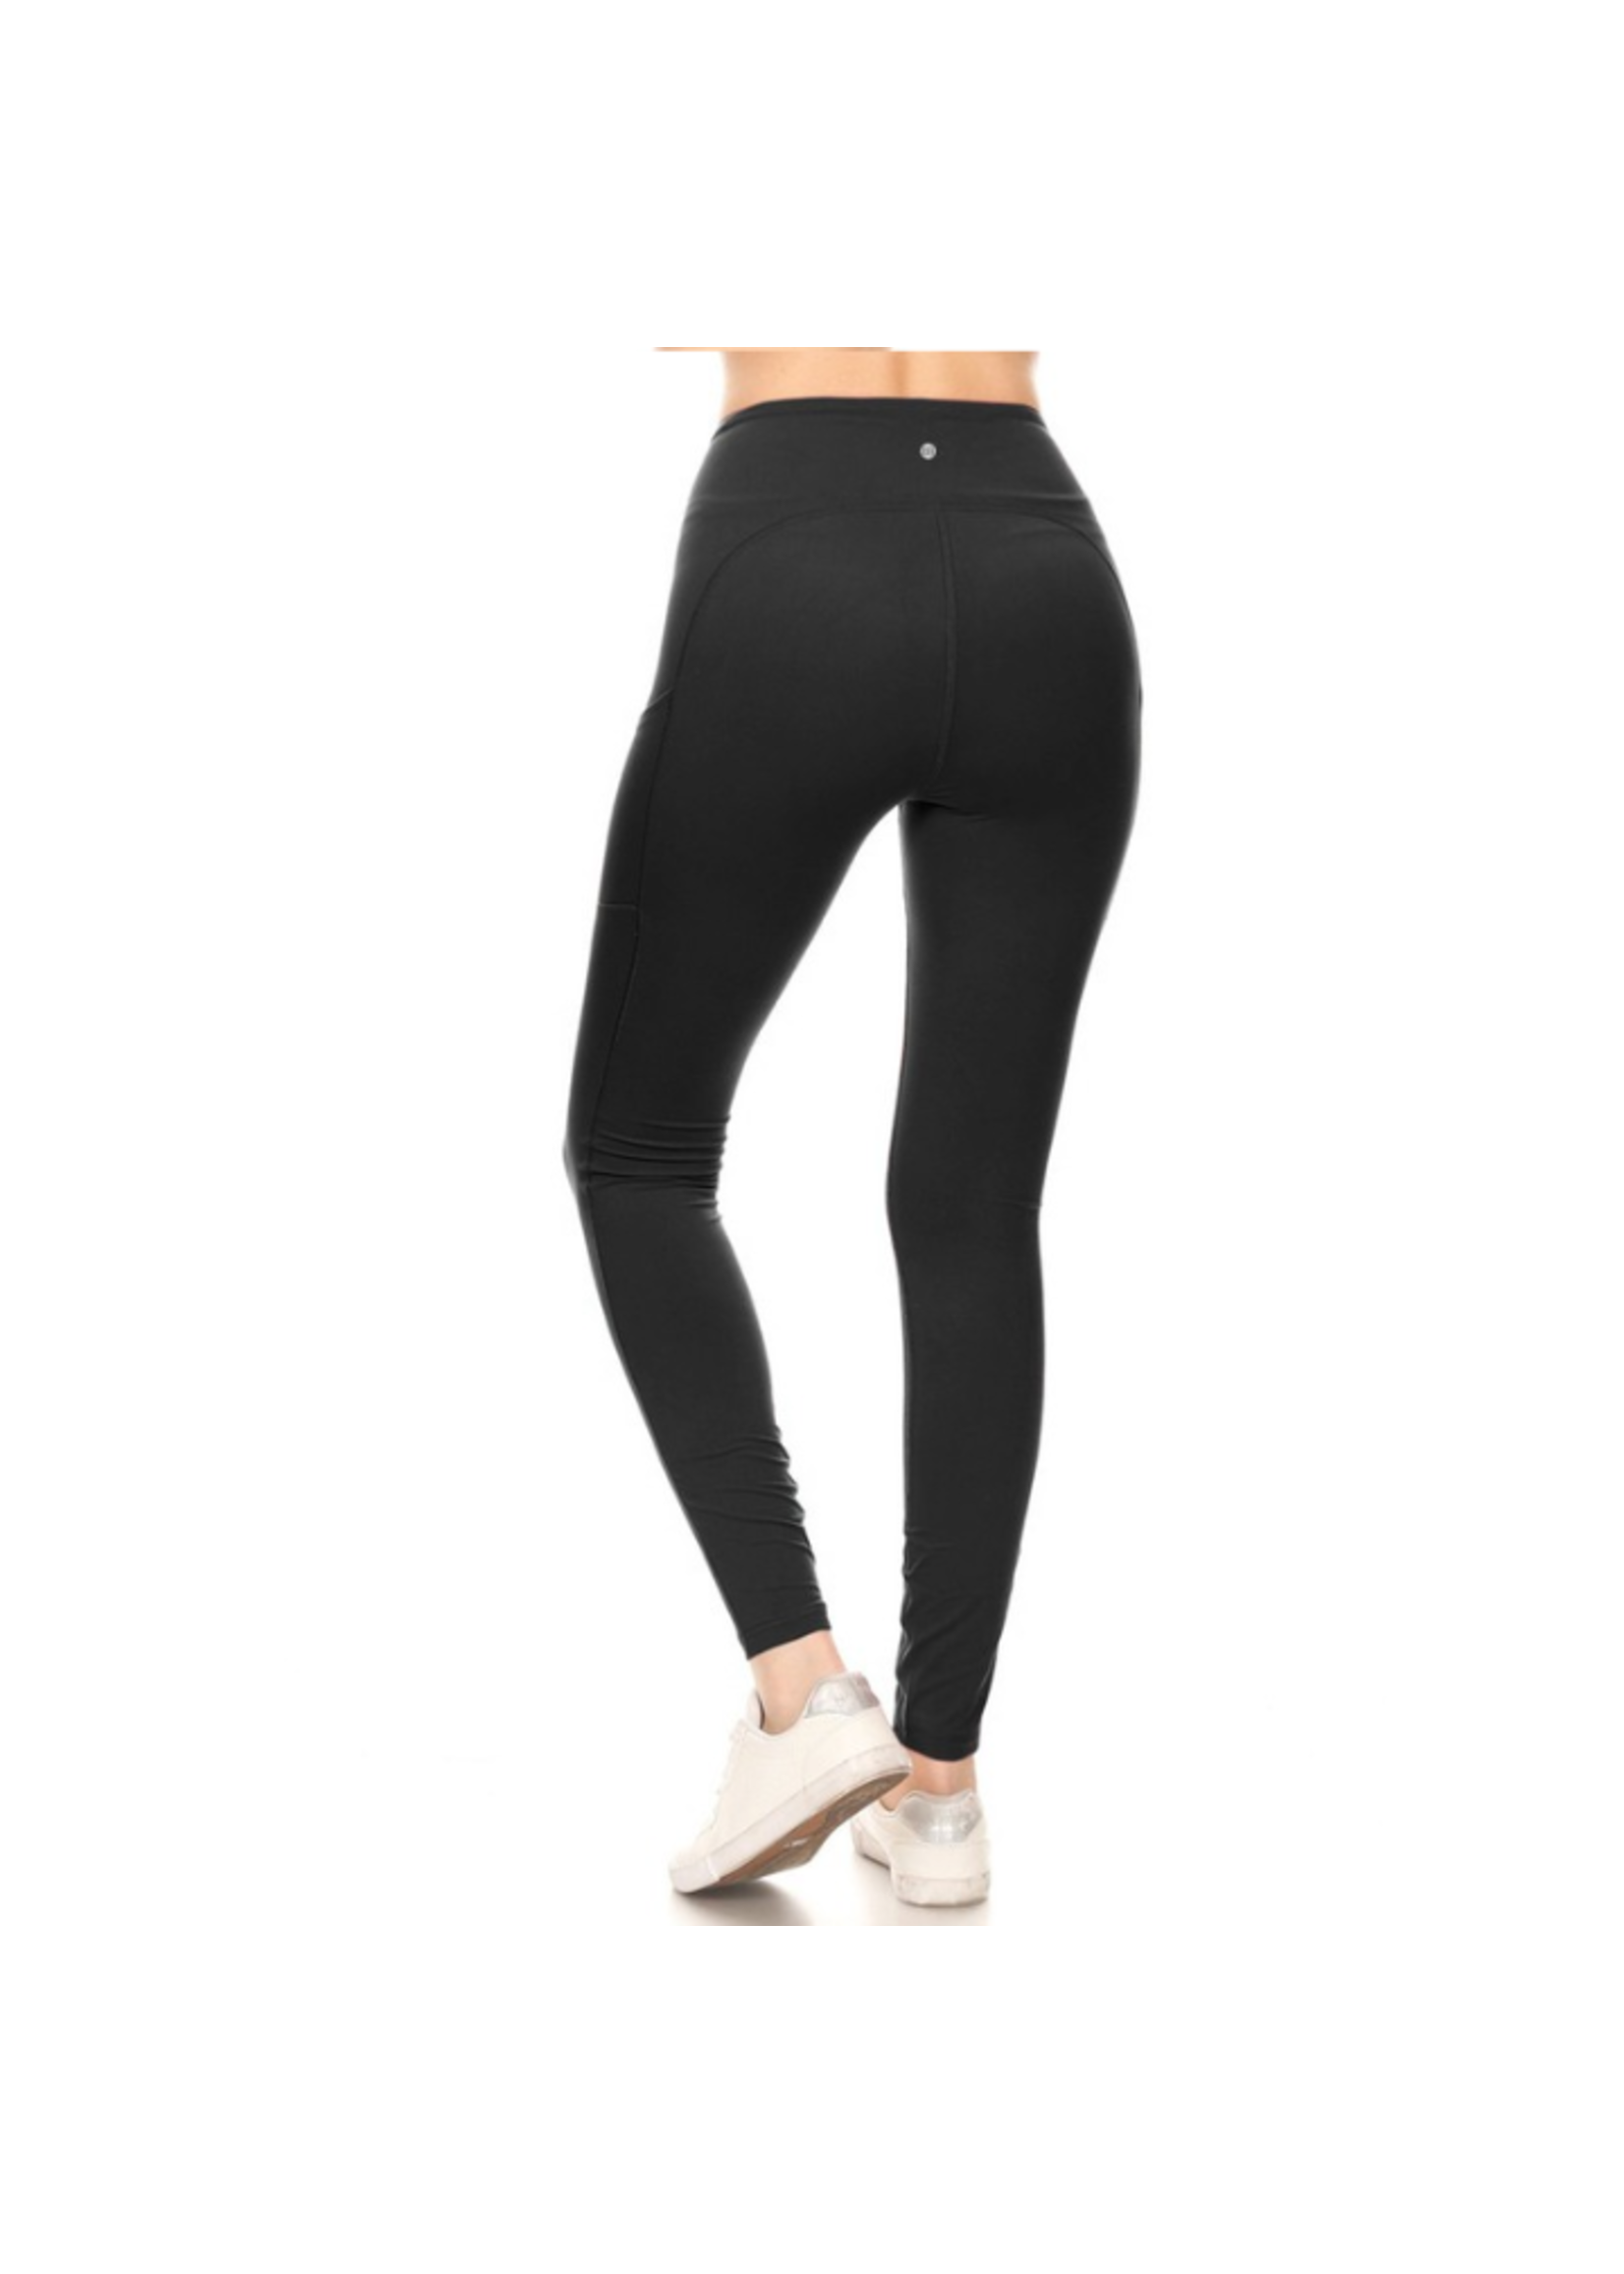 Twisted Southern Roots Boutique - Sang some of your favorite leggings…extra  15% till midnight w code: EXTRA15 Long black leggings, $16, two sizes: S/M,  M/XL Seriously the most comfortable leggings featuring an